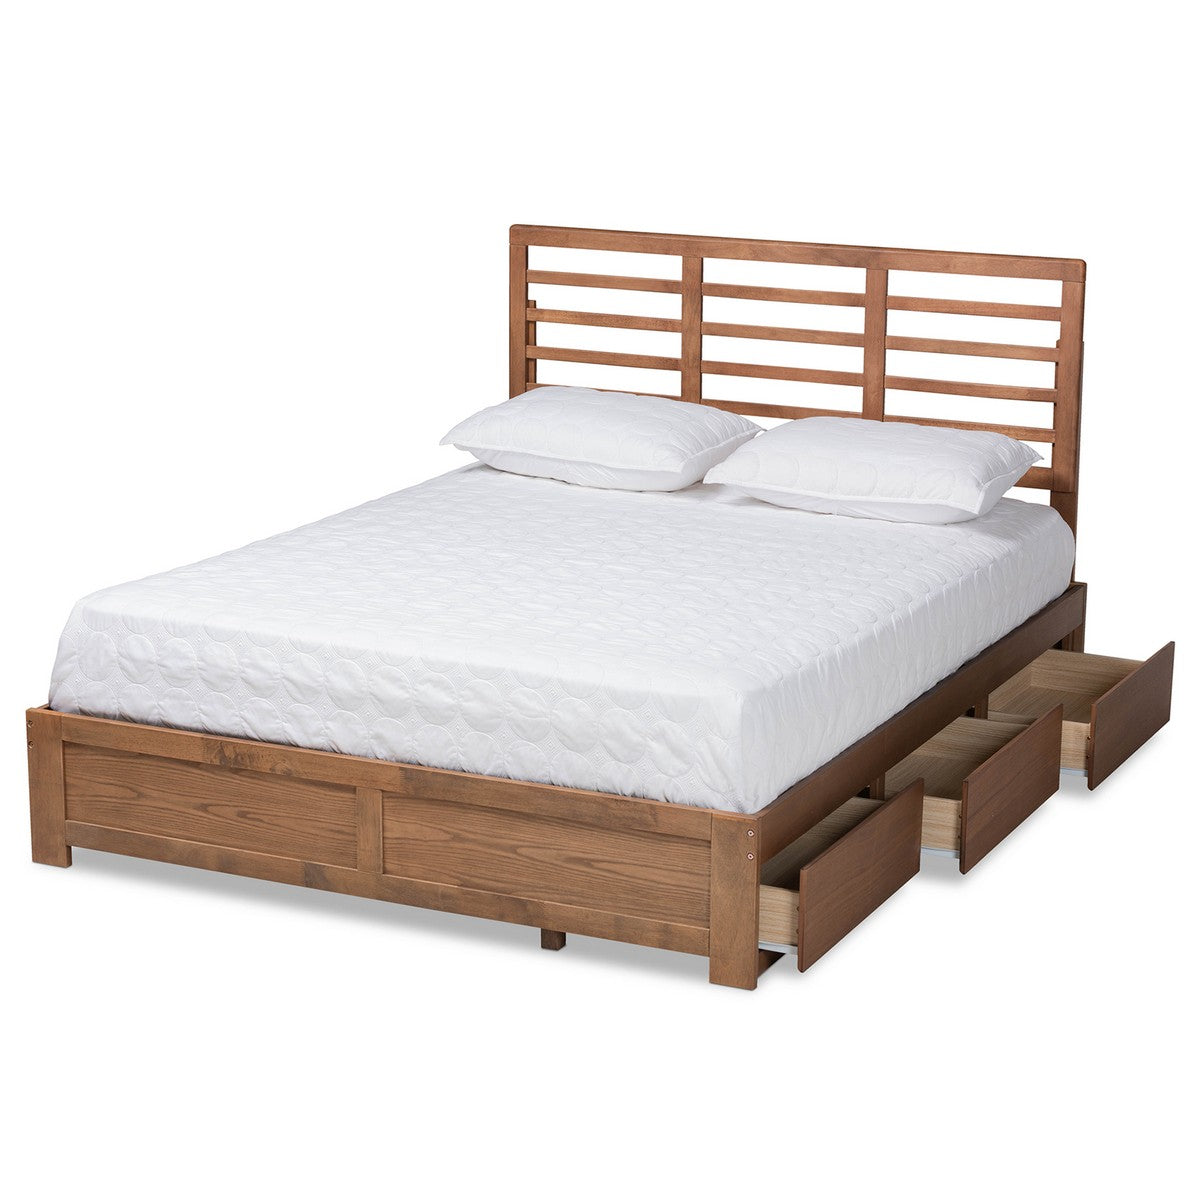 Baxton Studio Piera Modern and Contemporary Transitional Ash Walnut Brown Finished Wood Full Size 3-Drawer Platform Storage Bed